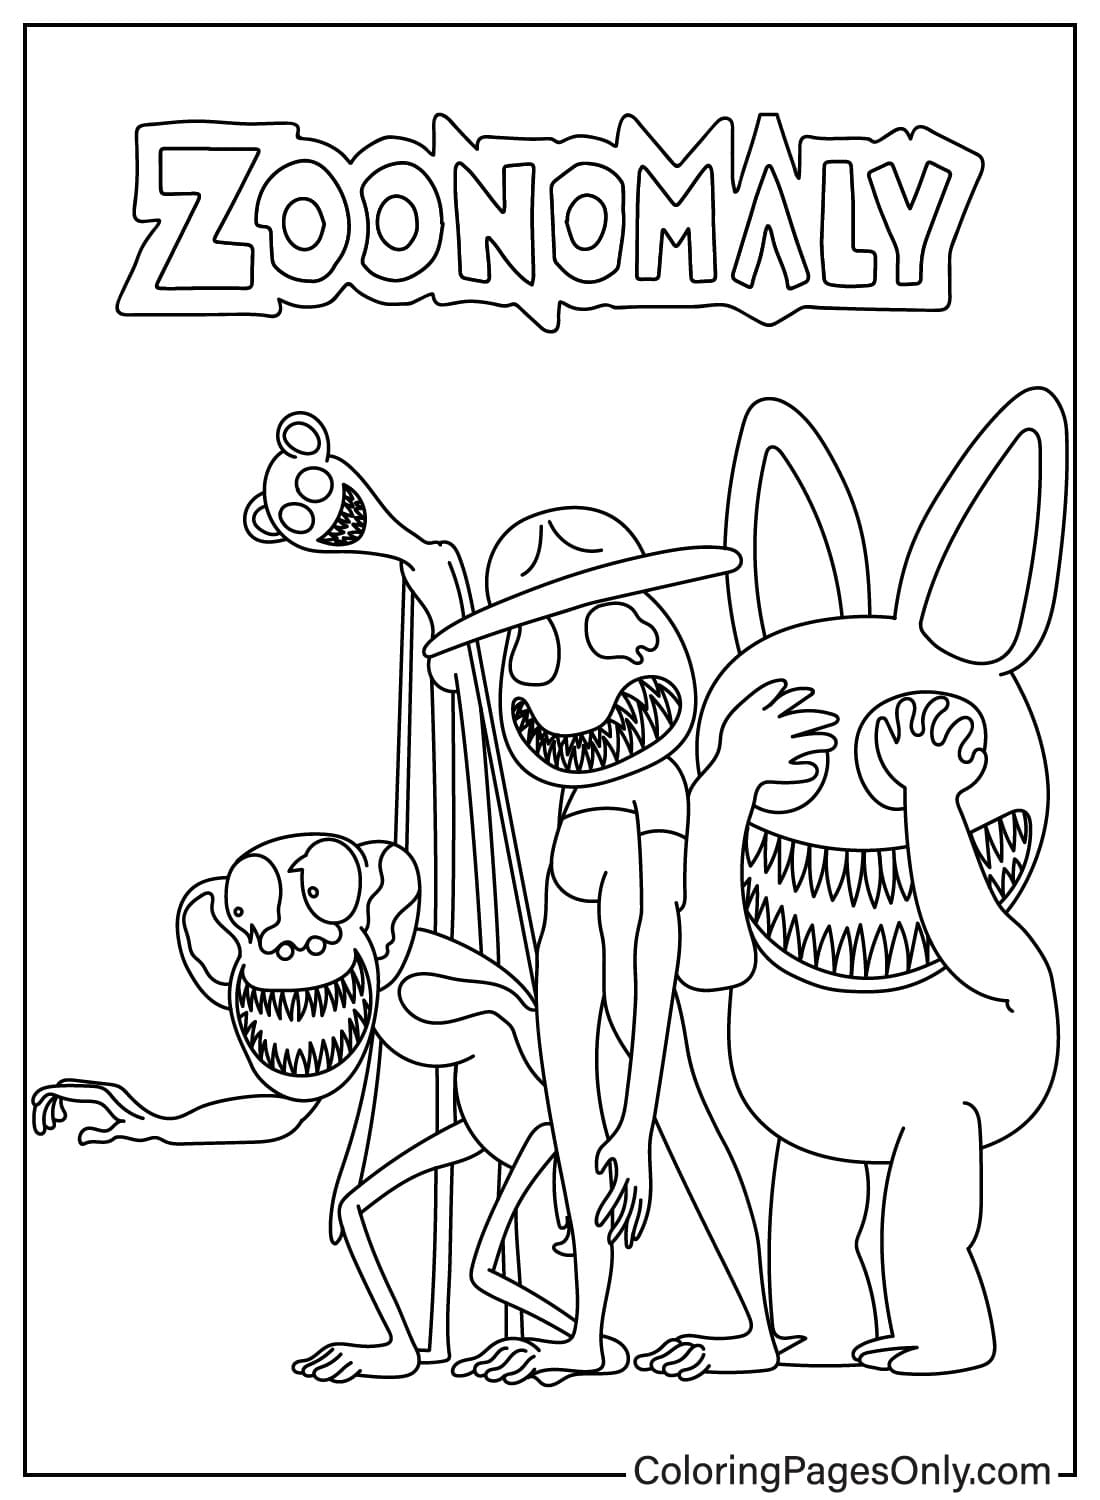 Character Zoonomaly Coloring Pages from Zoonomaly